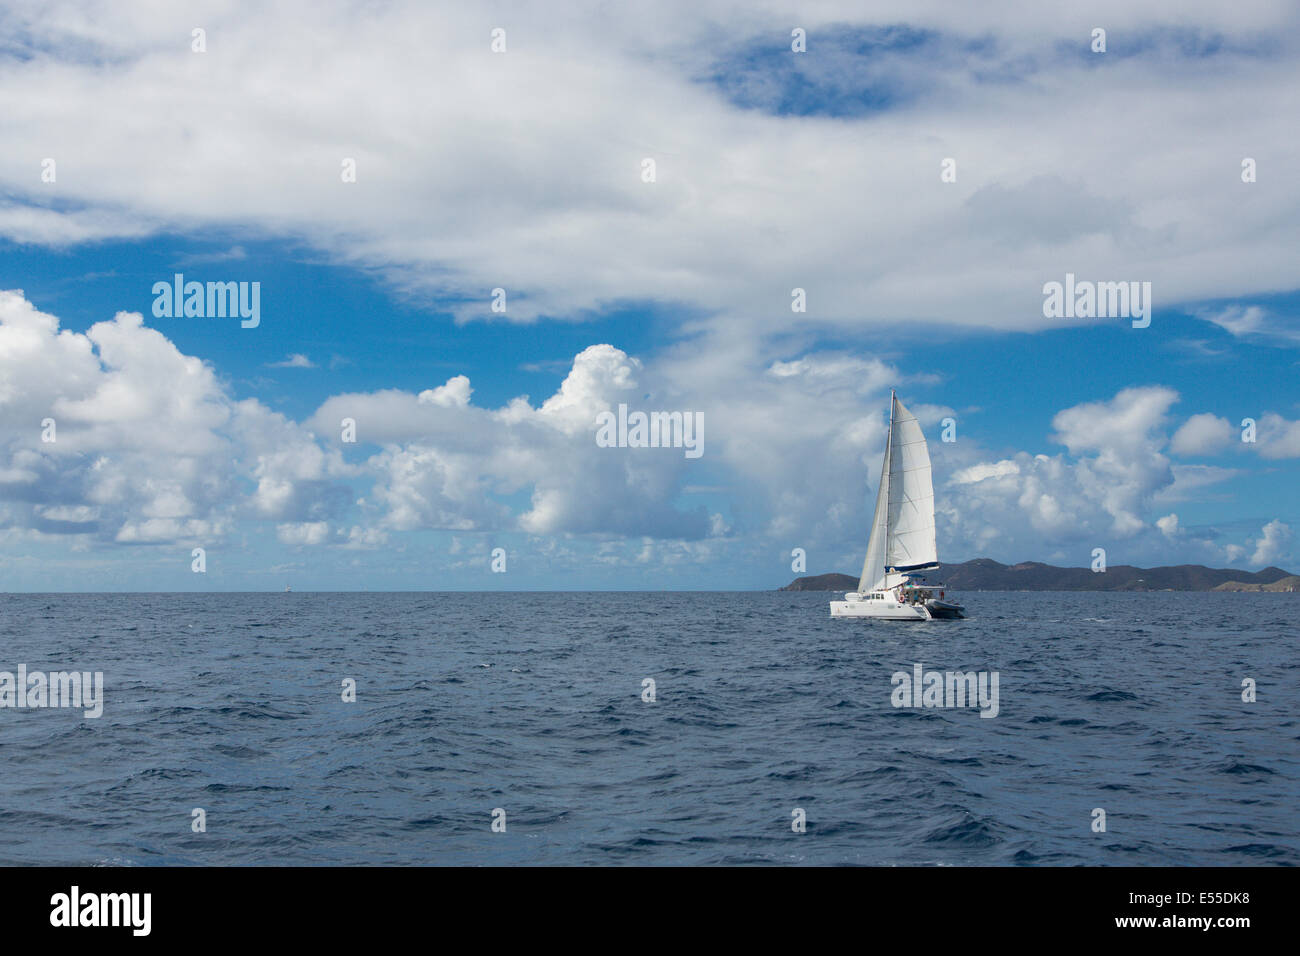 Sailboat in the Sir Frances Drake Channel of the Caribbean Sea between the US and British Virgin Islands Stock Photo